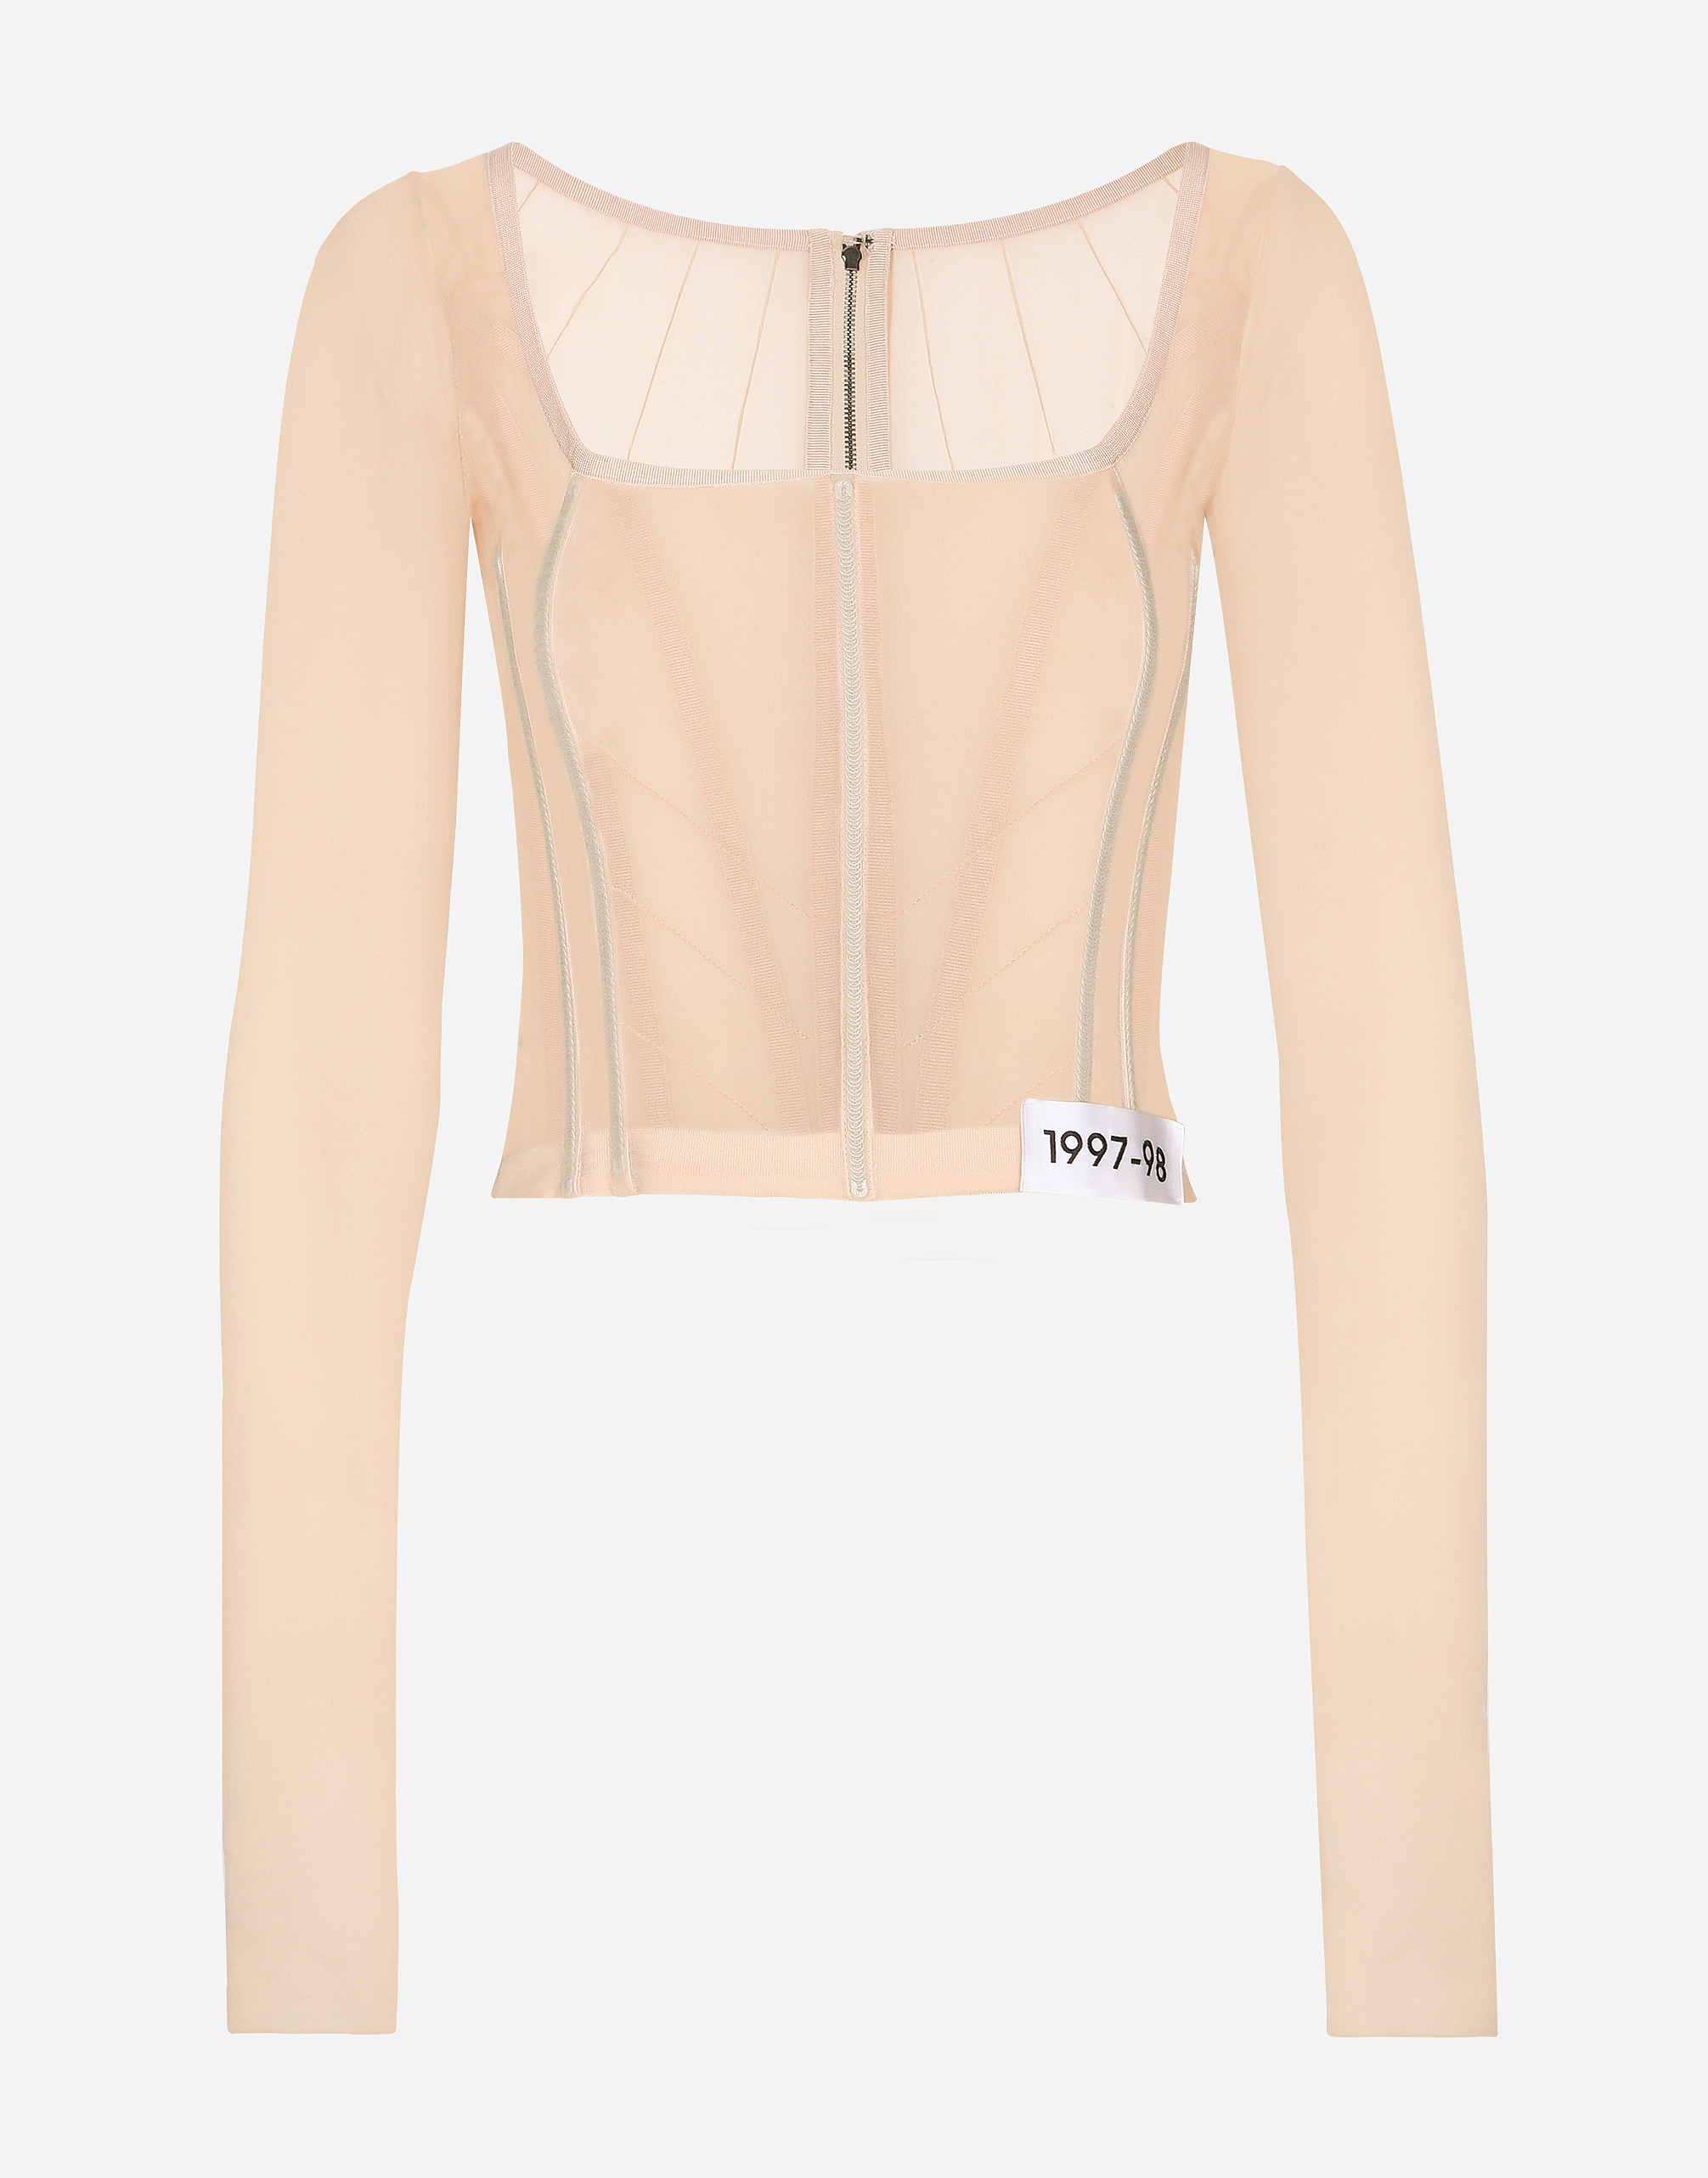 KIM DOLCE&GABBANA Georgette top with corset detailing in Beige